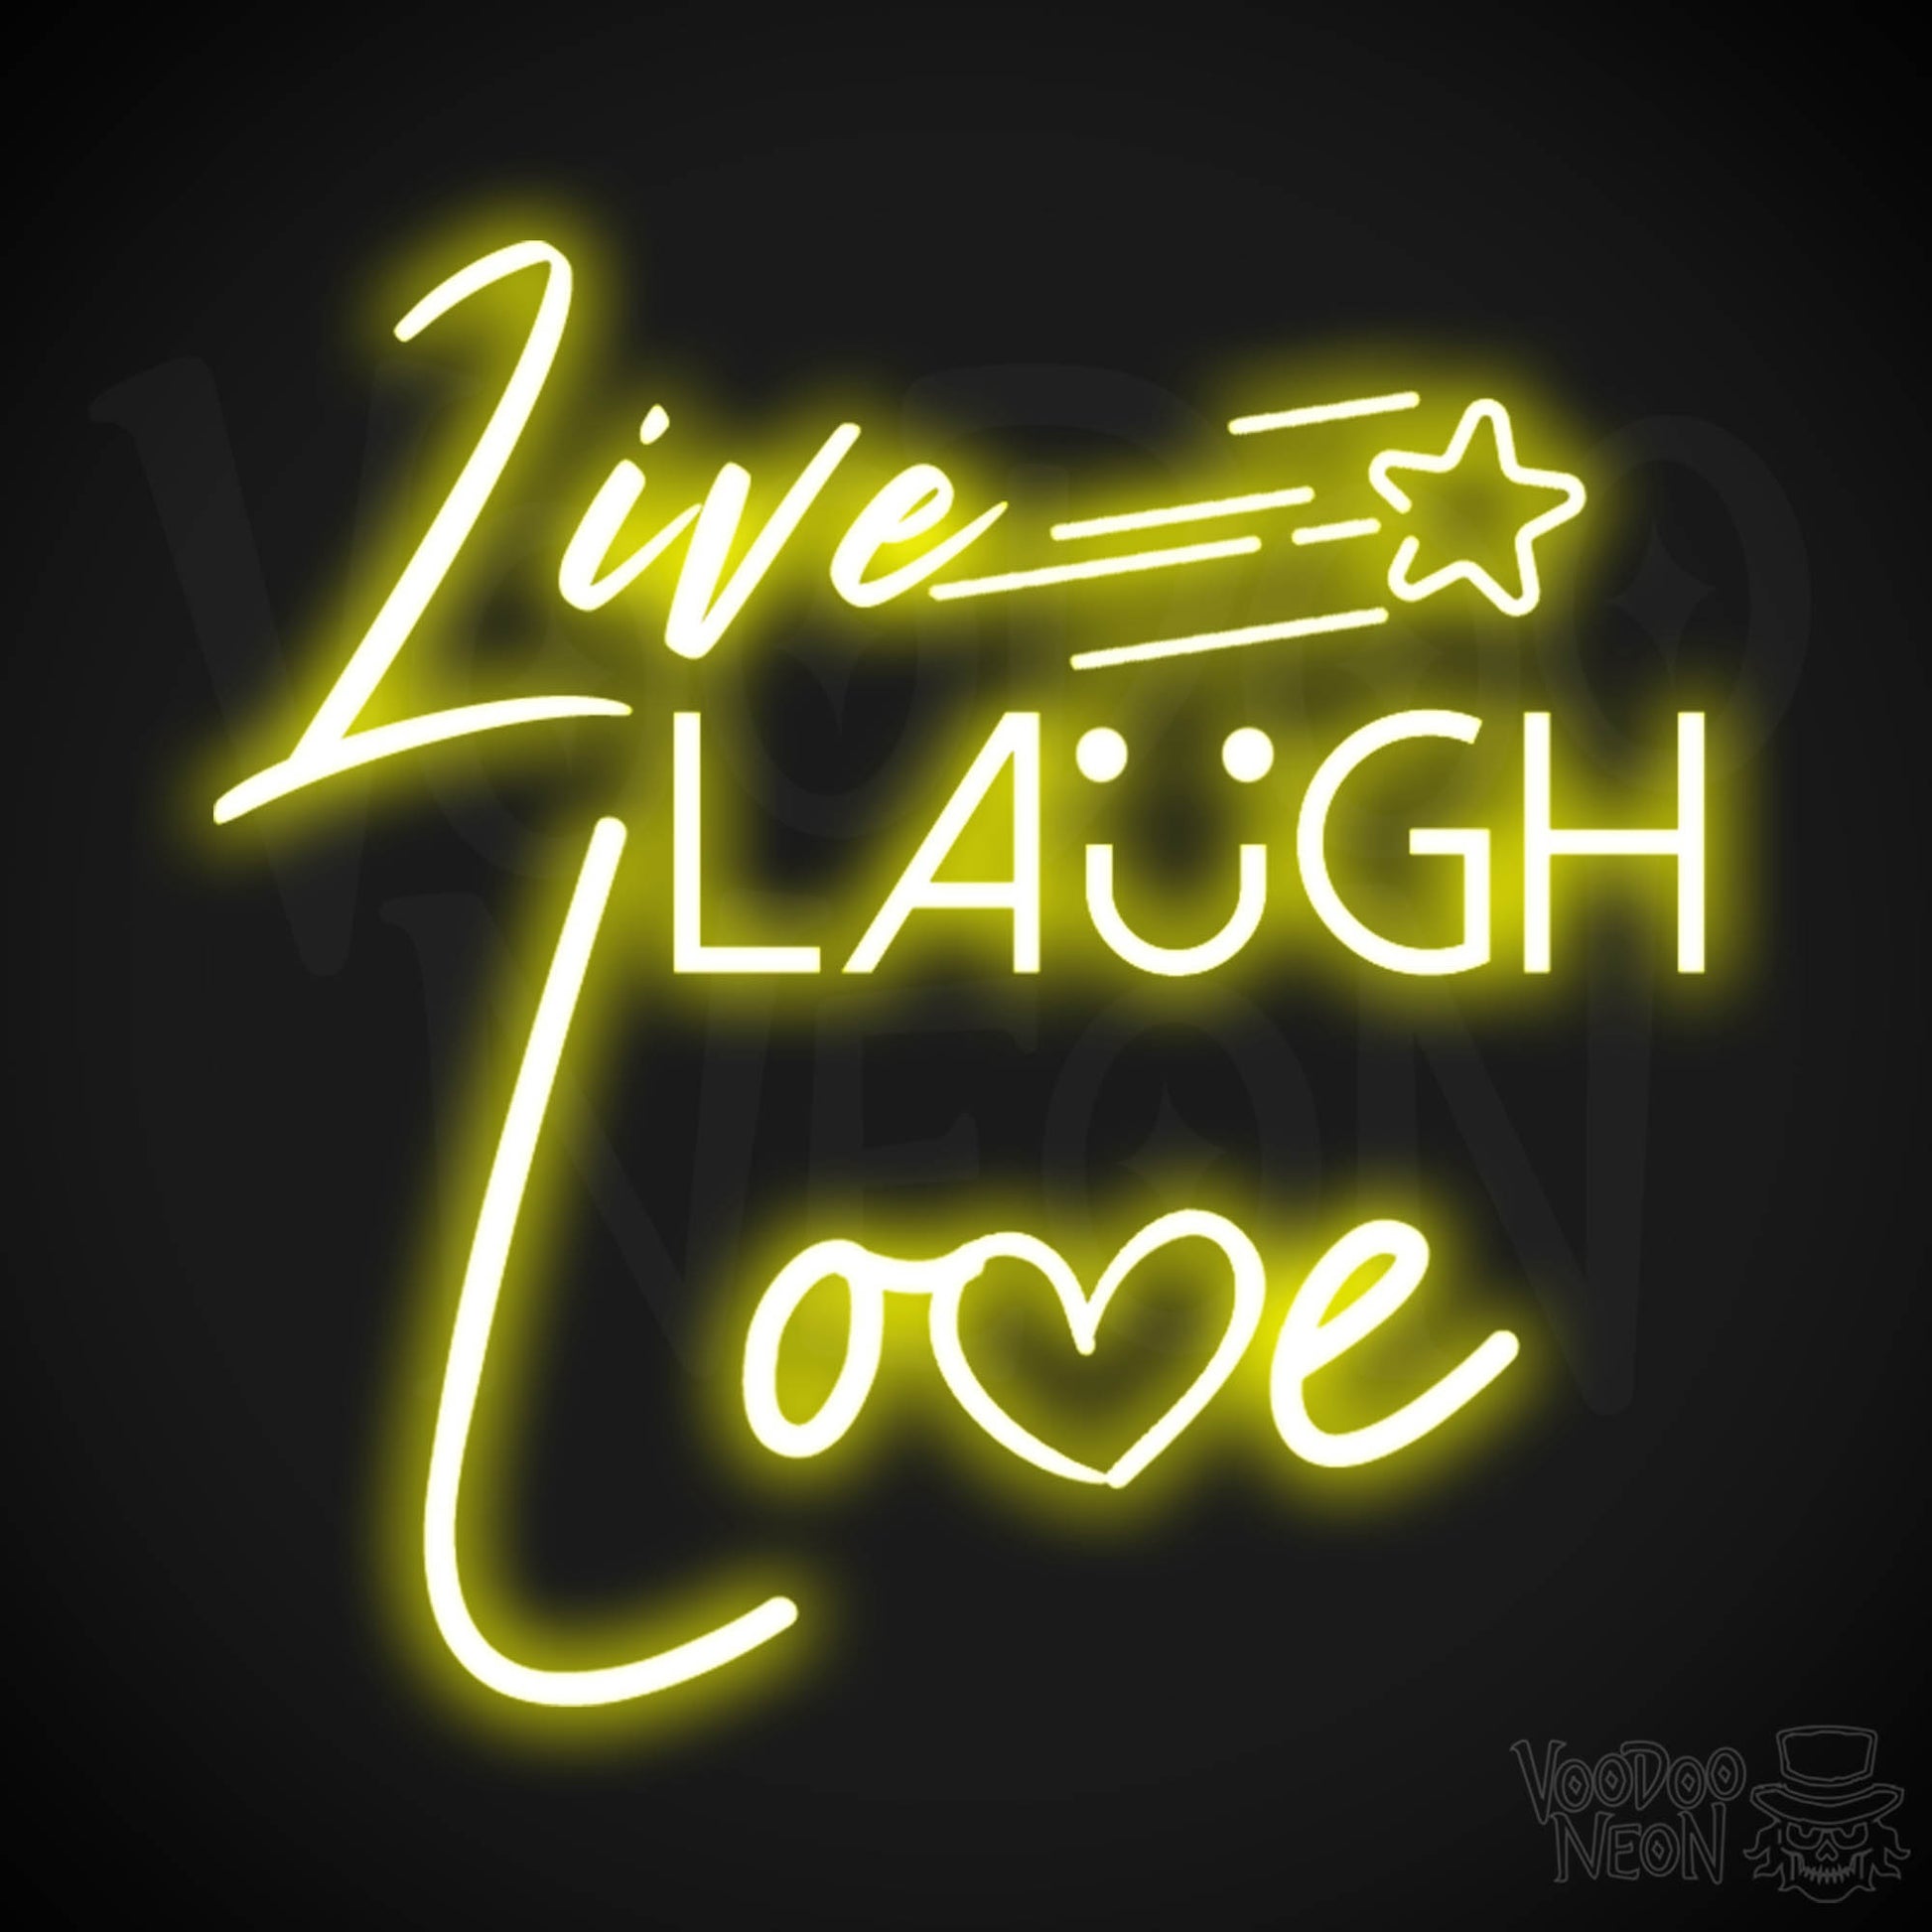 Live Laugh Love Neon Sign - Neon Live Laugh Love Sign - Wall Art - Color Yellow